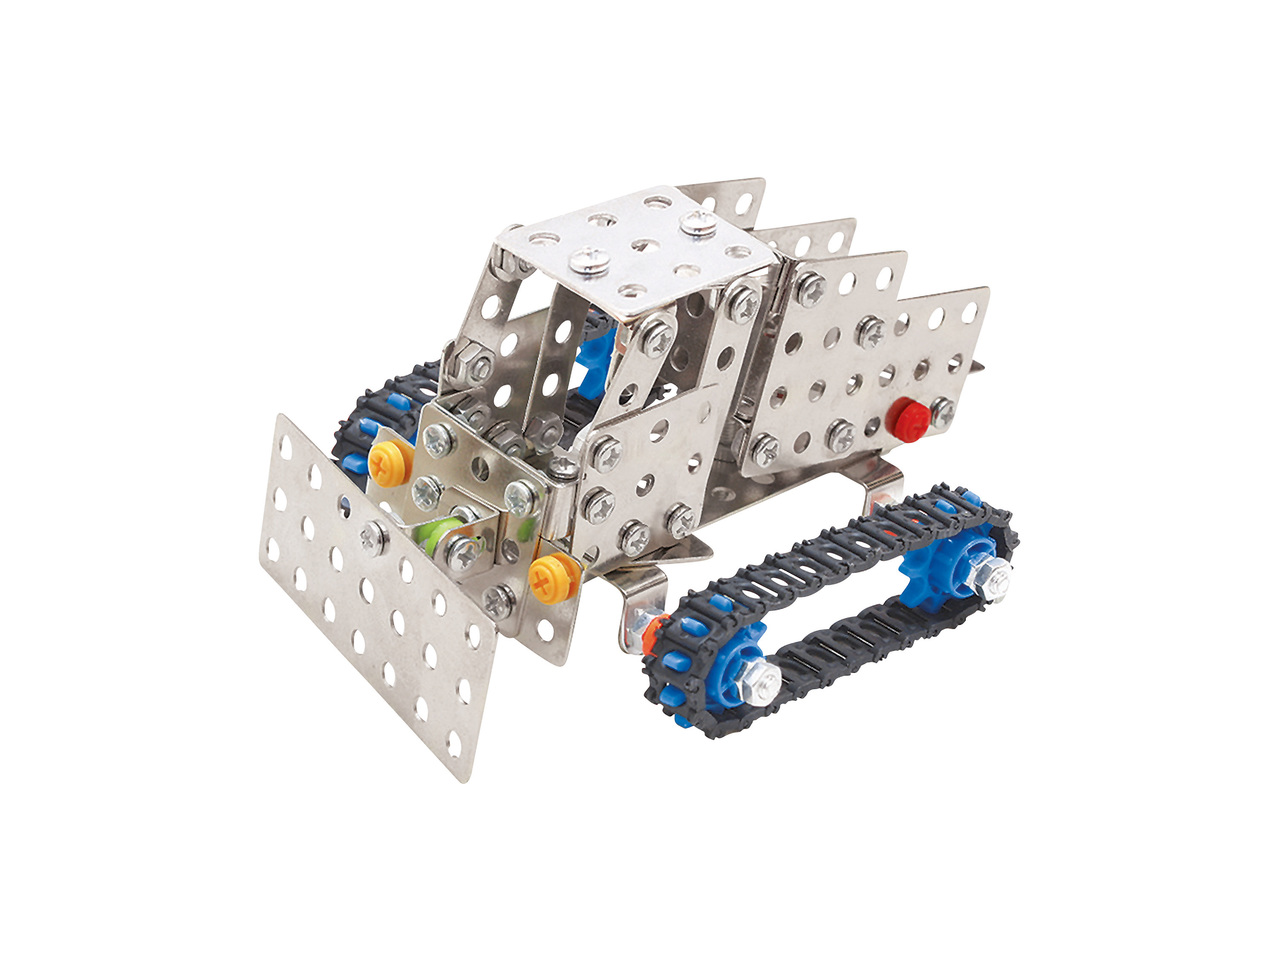 PLAYTIVE Build it Yourself Metal Toy Vehicles